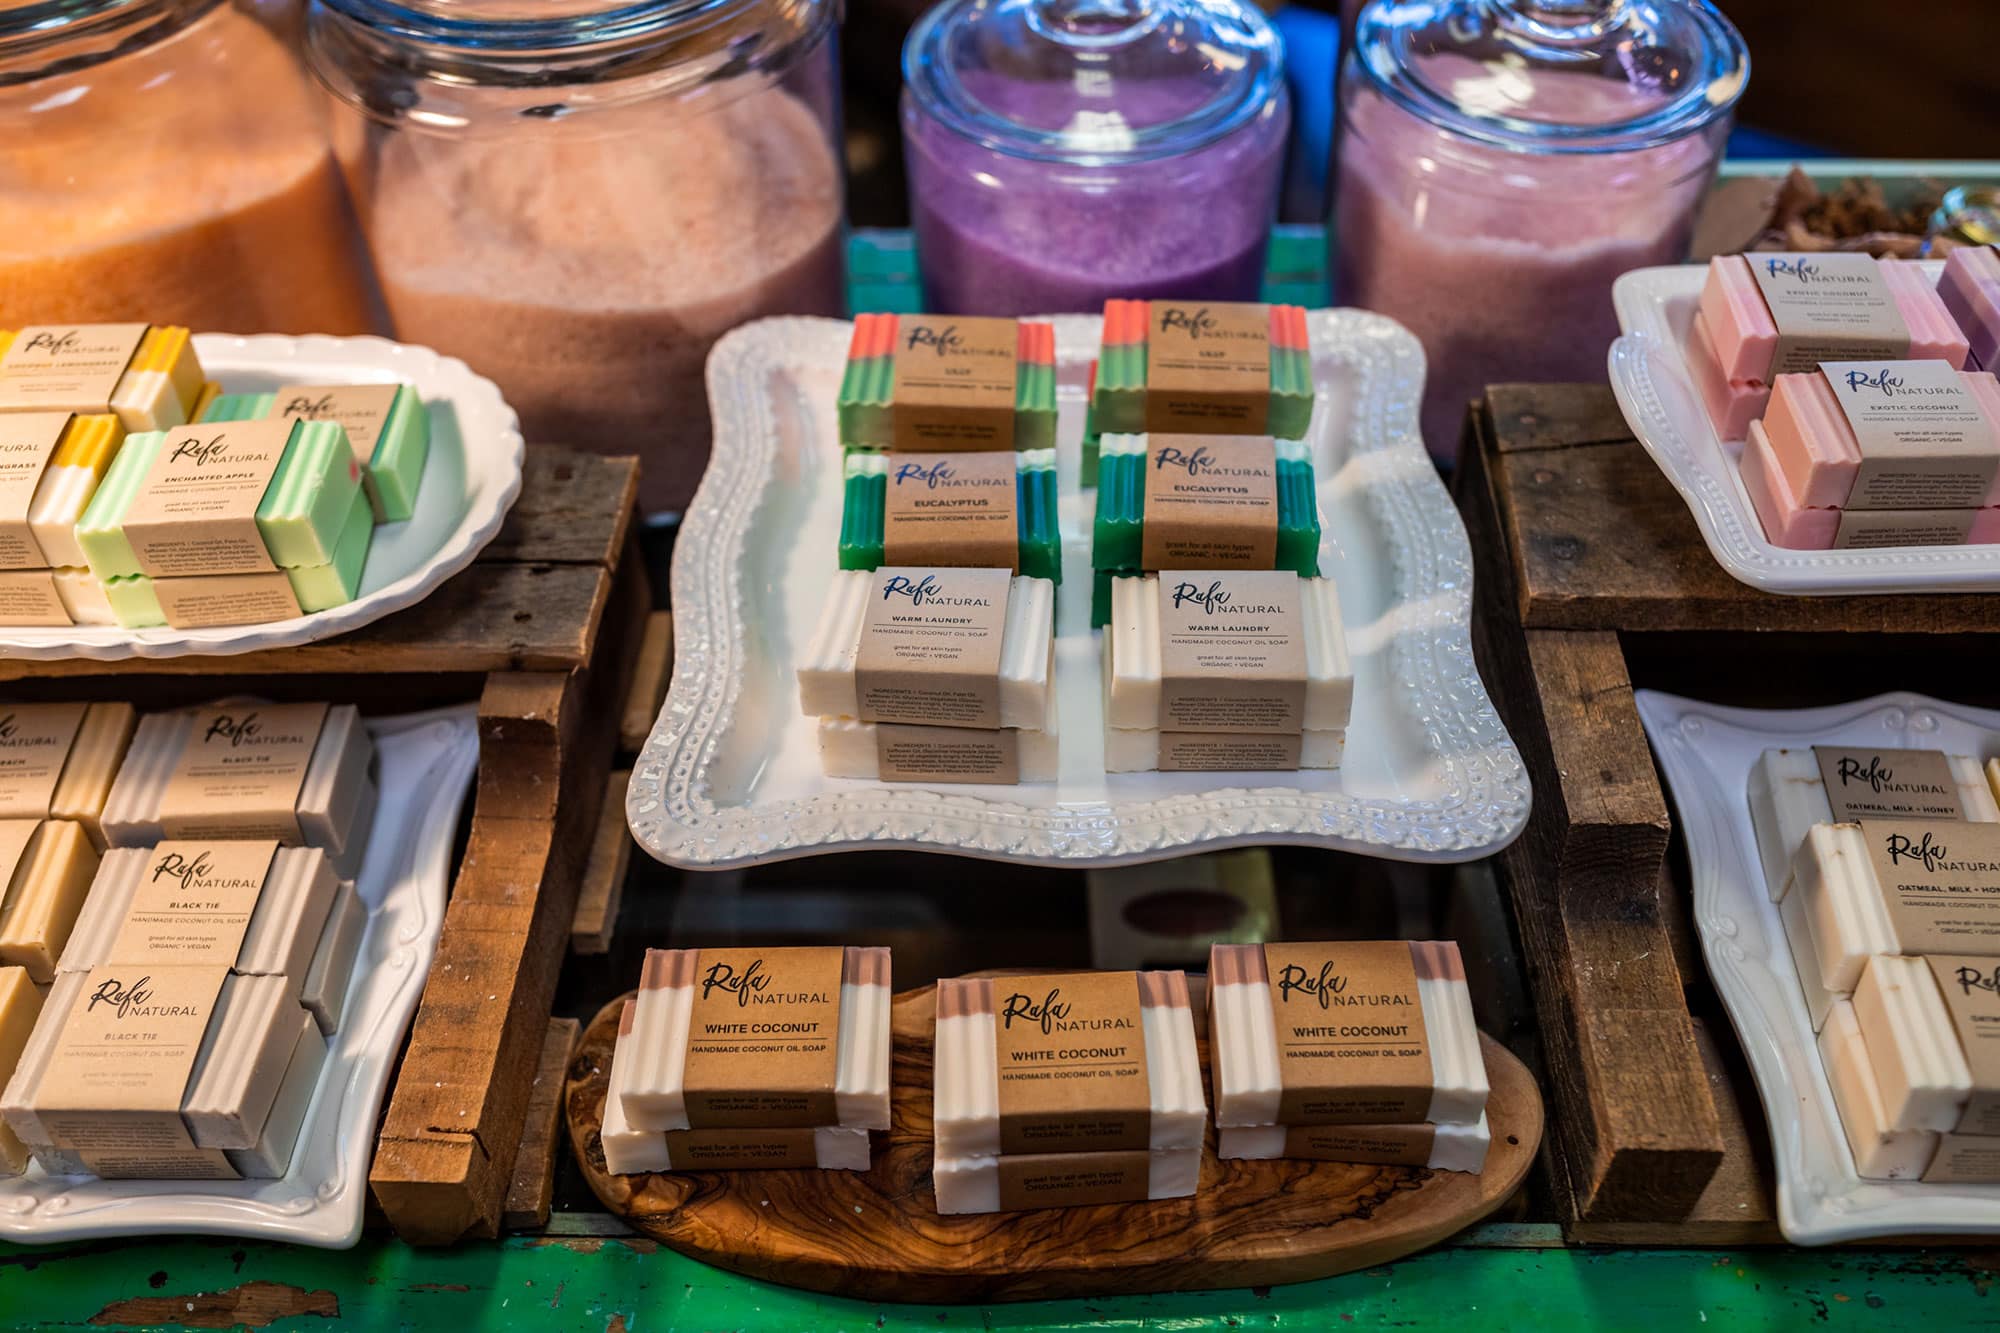 selection of colorful soap for sale at Rafa Natural in Lake Wales, FL